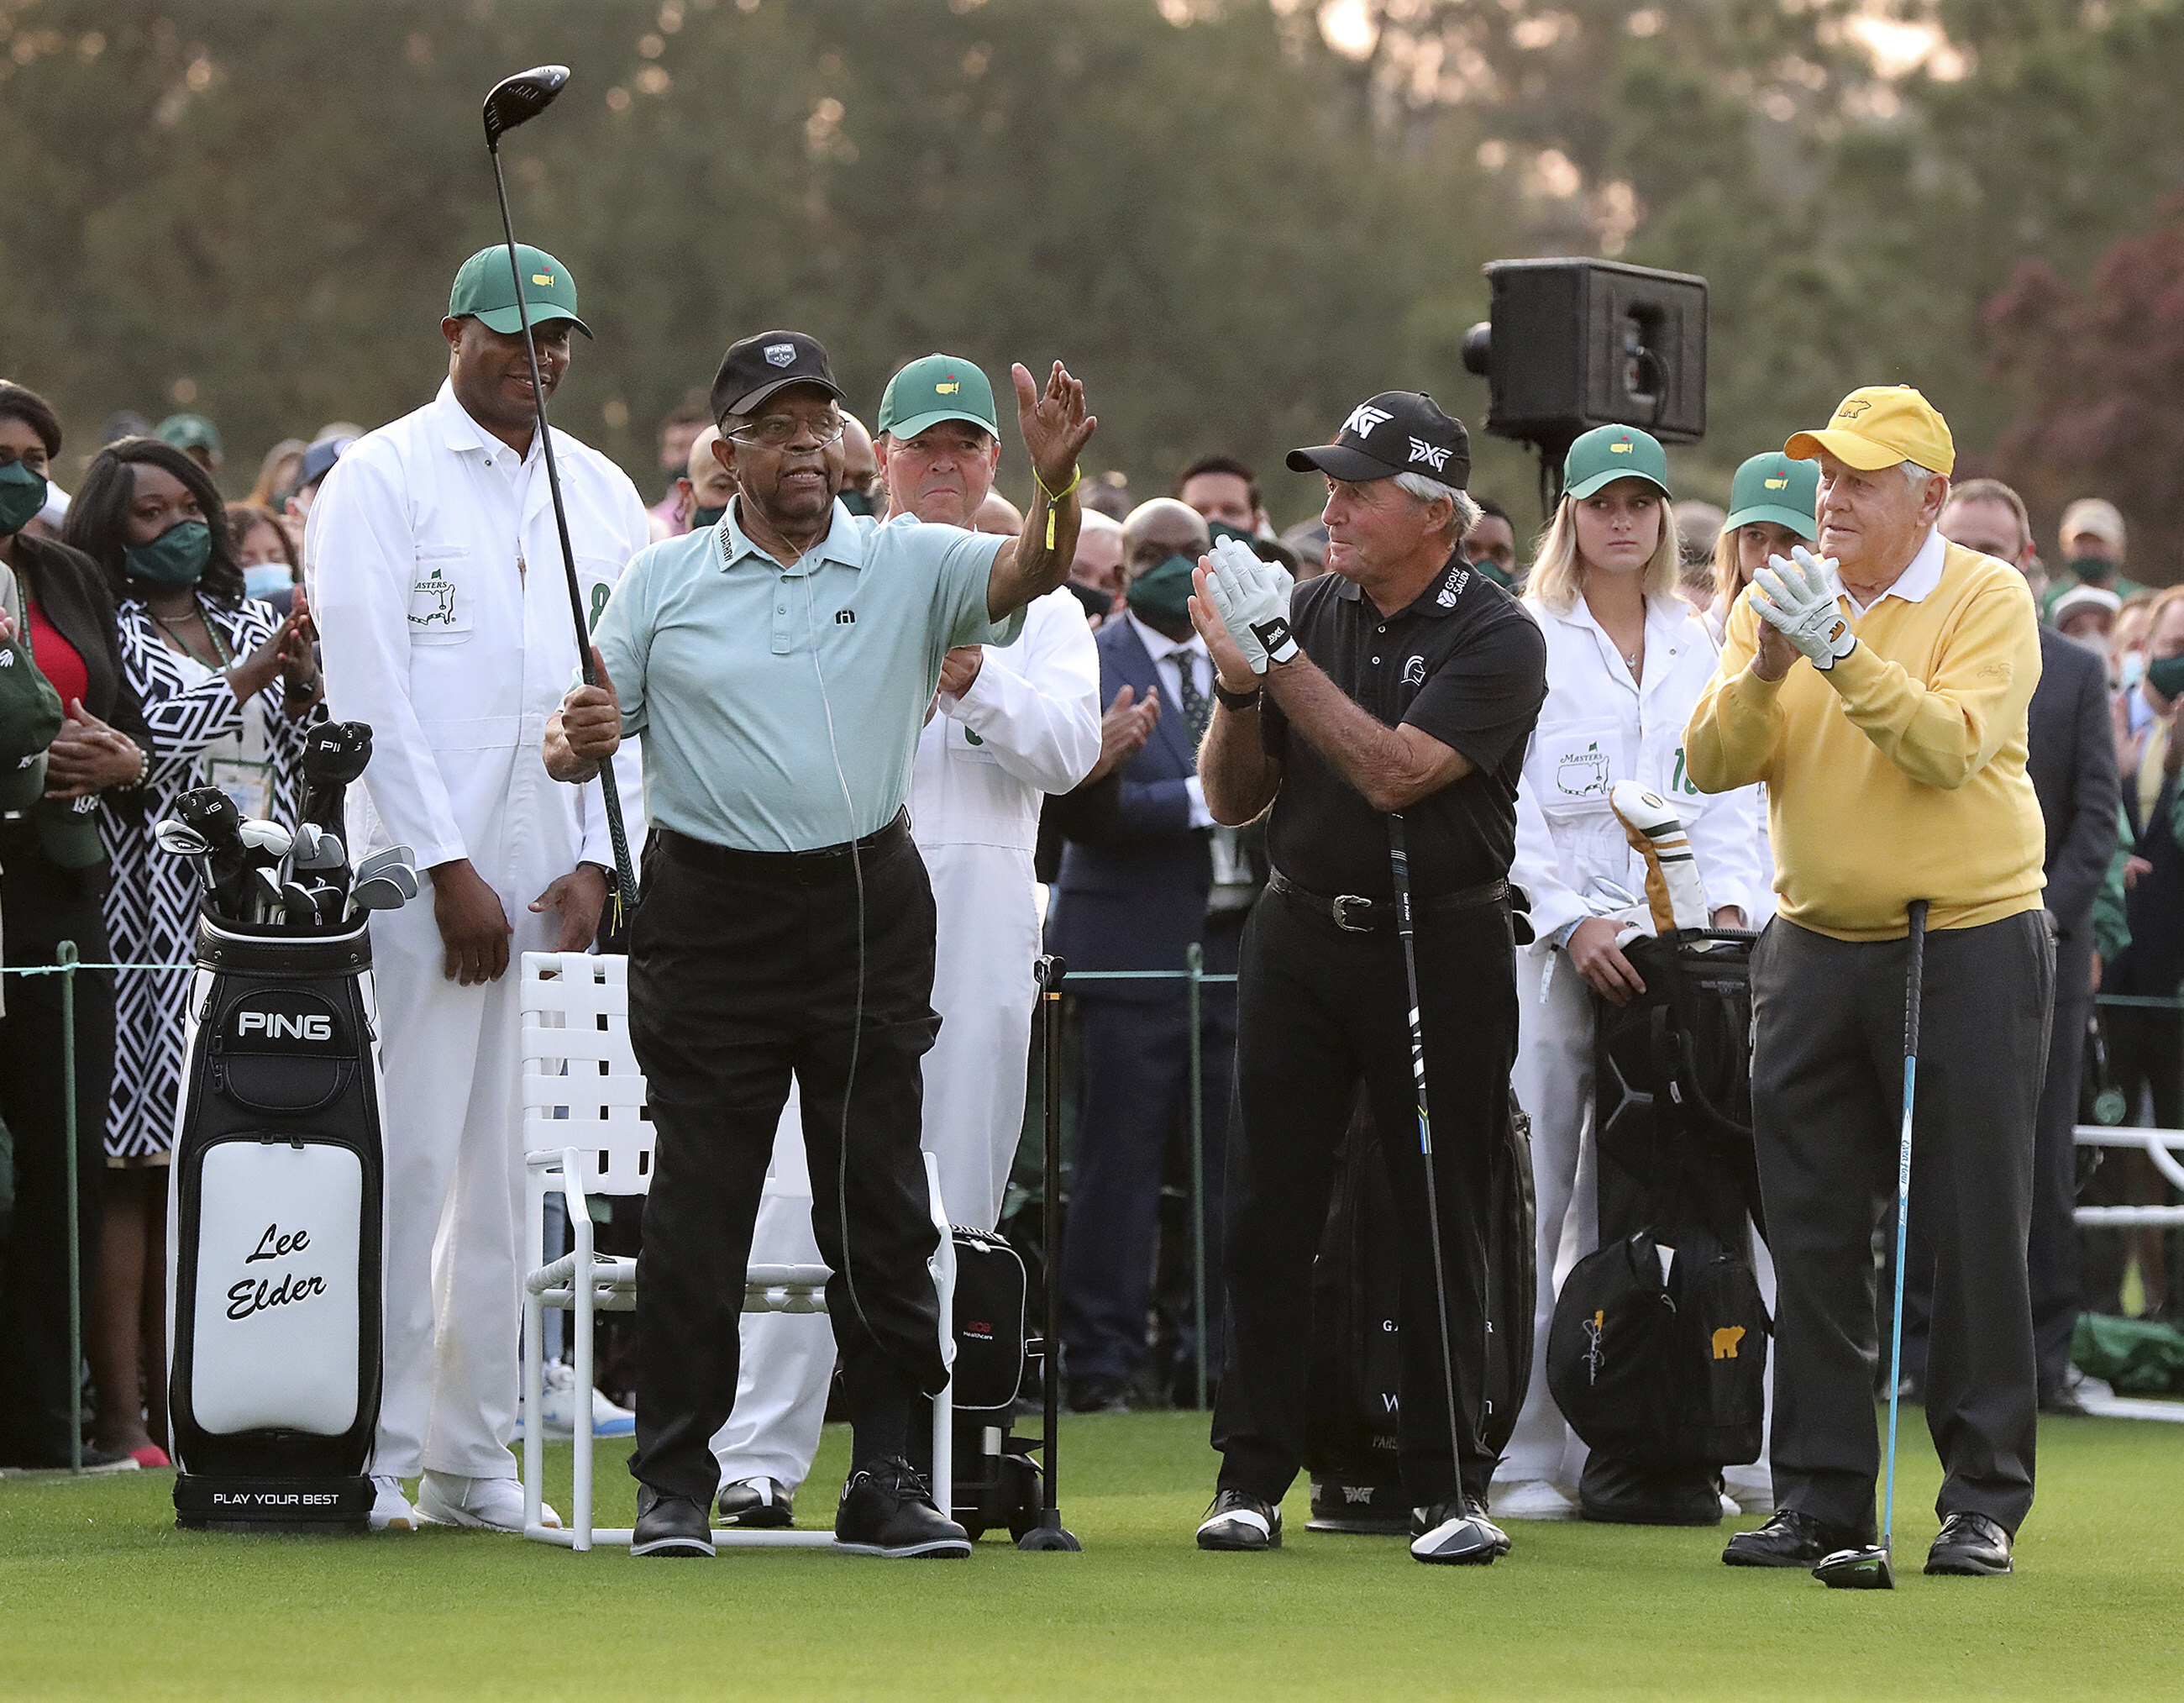 Honorary starter Lee Elder (left) is applauded by Gary Player (centre) and Jack Nicklaus during introductions for the ceremonial tee shots to begin the Masters at Augusta National in April. Photo: AP